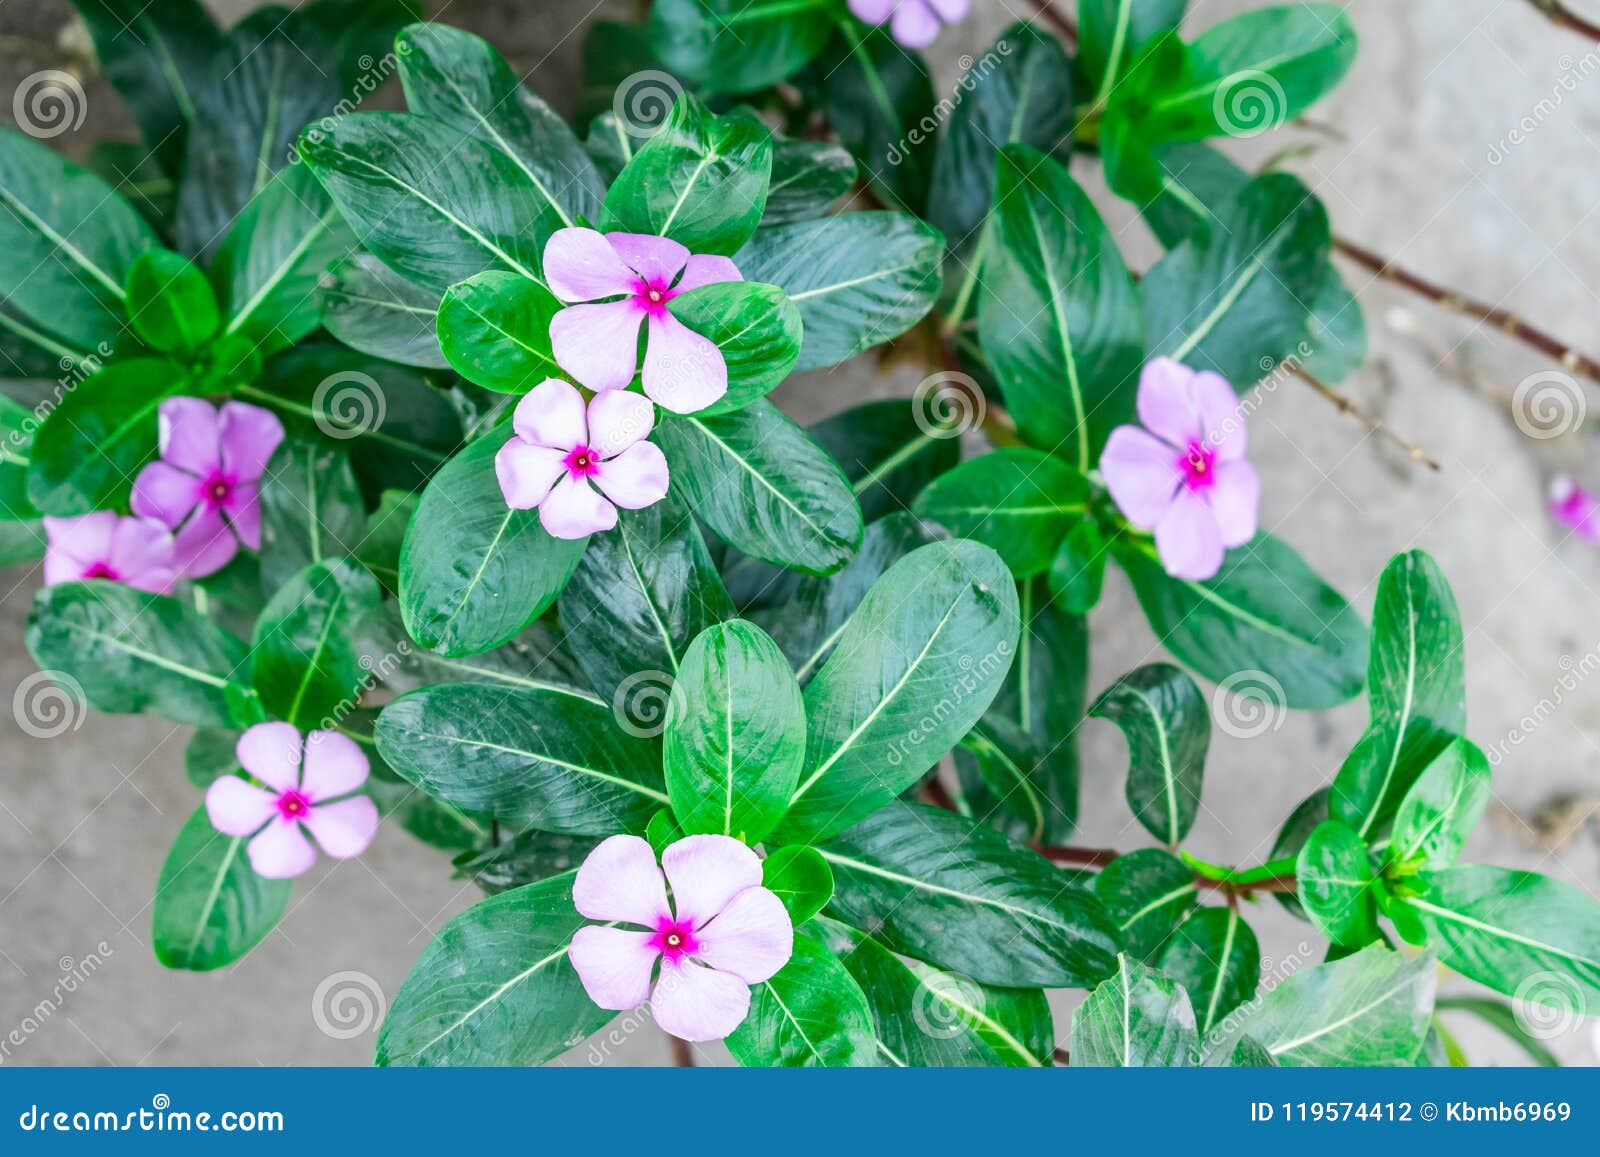 indian Flower Madagascar Periwinkle Plant Close View at Rural ...